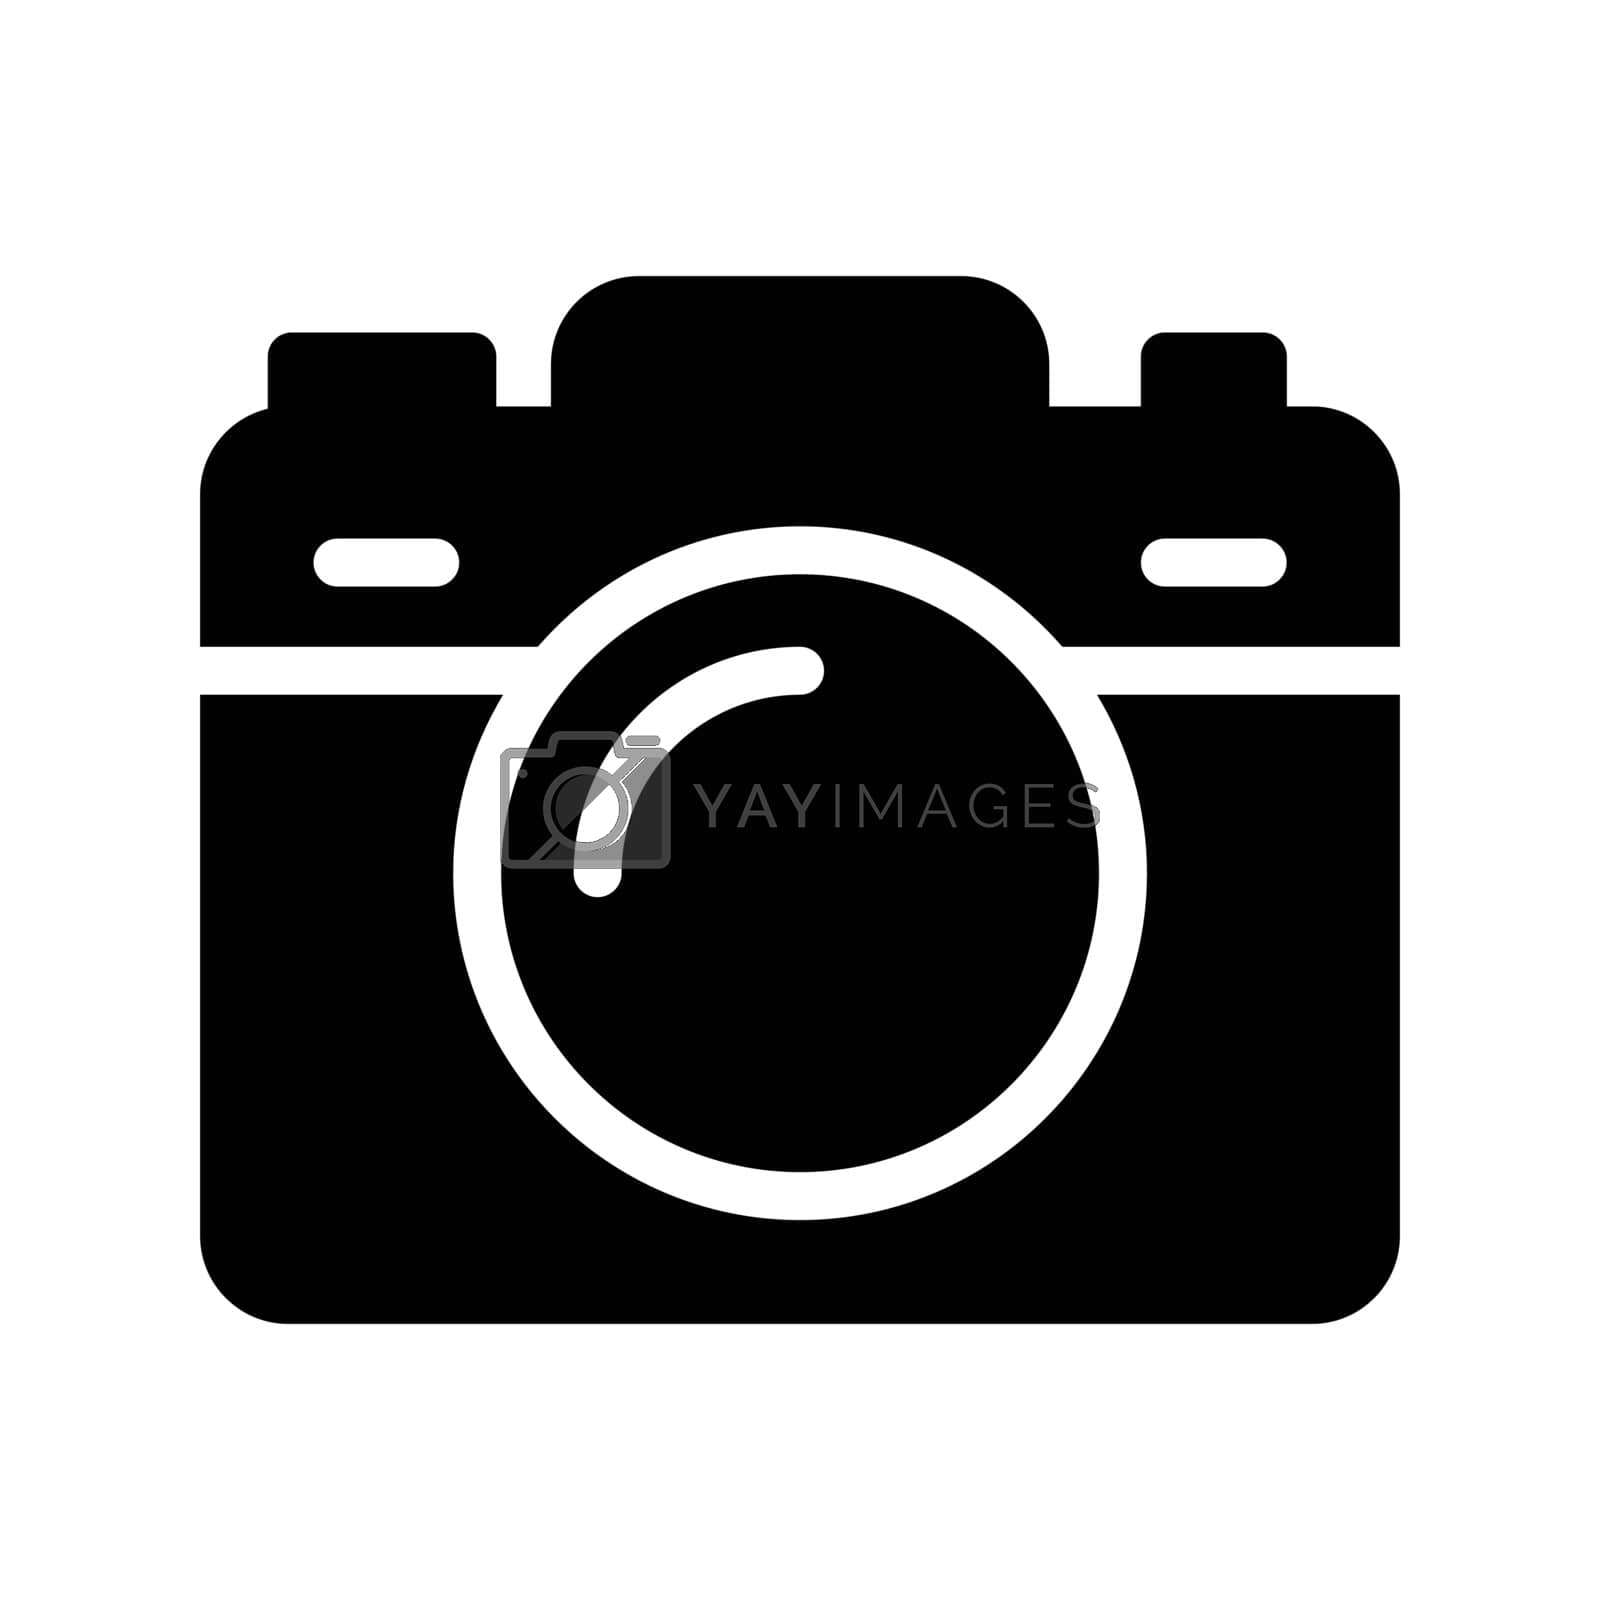 Royalty free image of capture by vectorstall